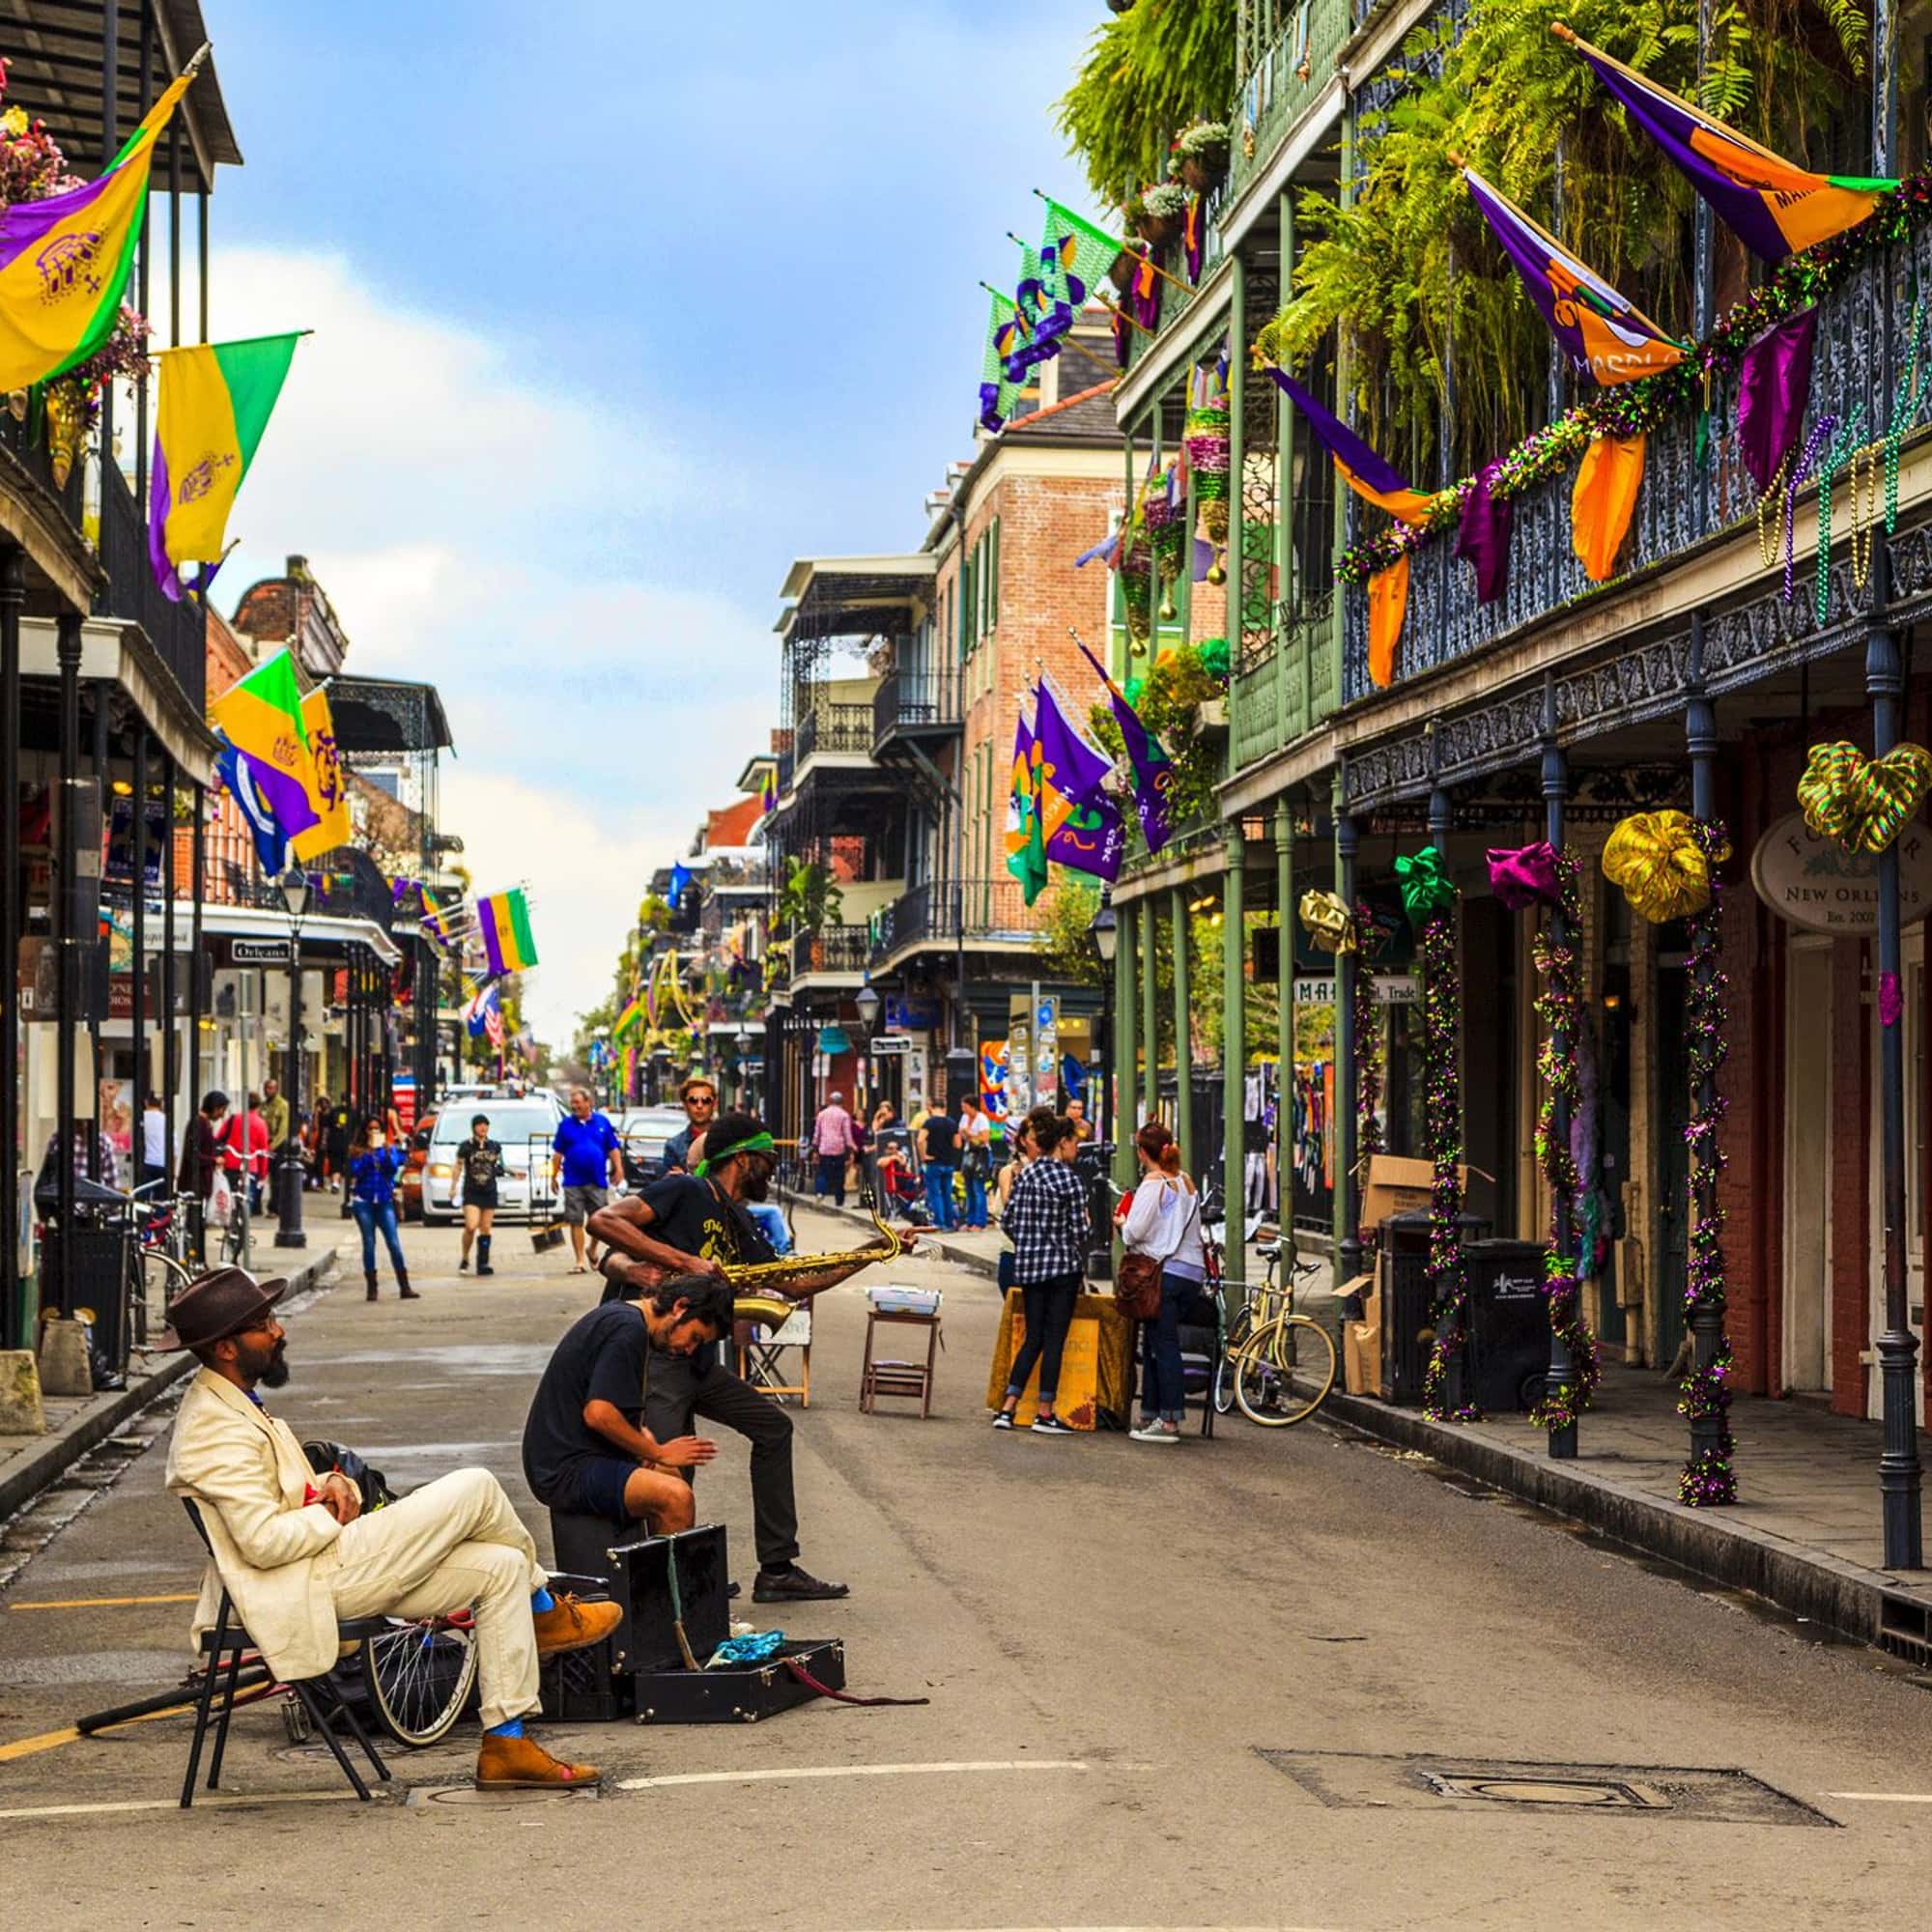 Hotels in New Orleans, Louisiana - Page 2 | Fodor’s Travel